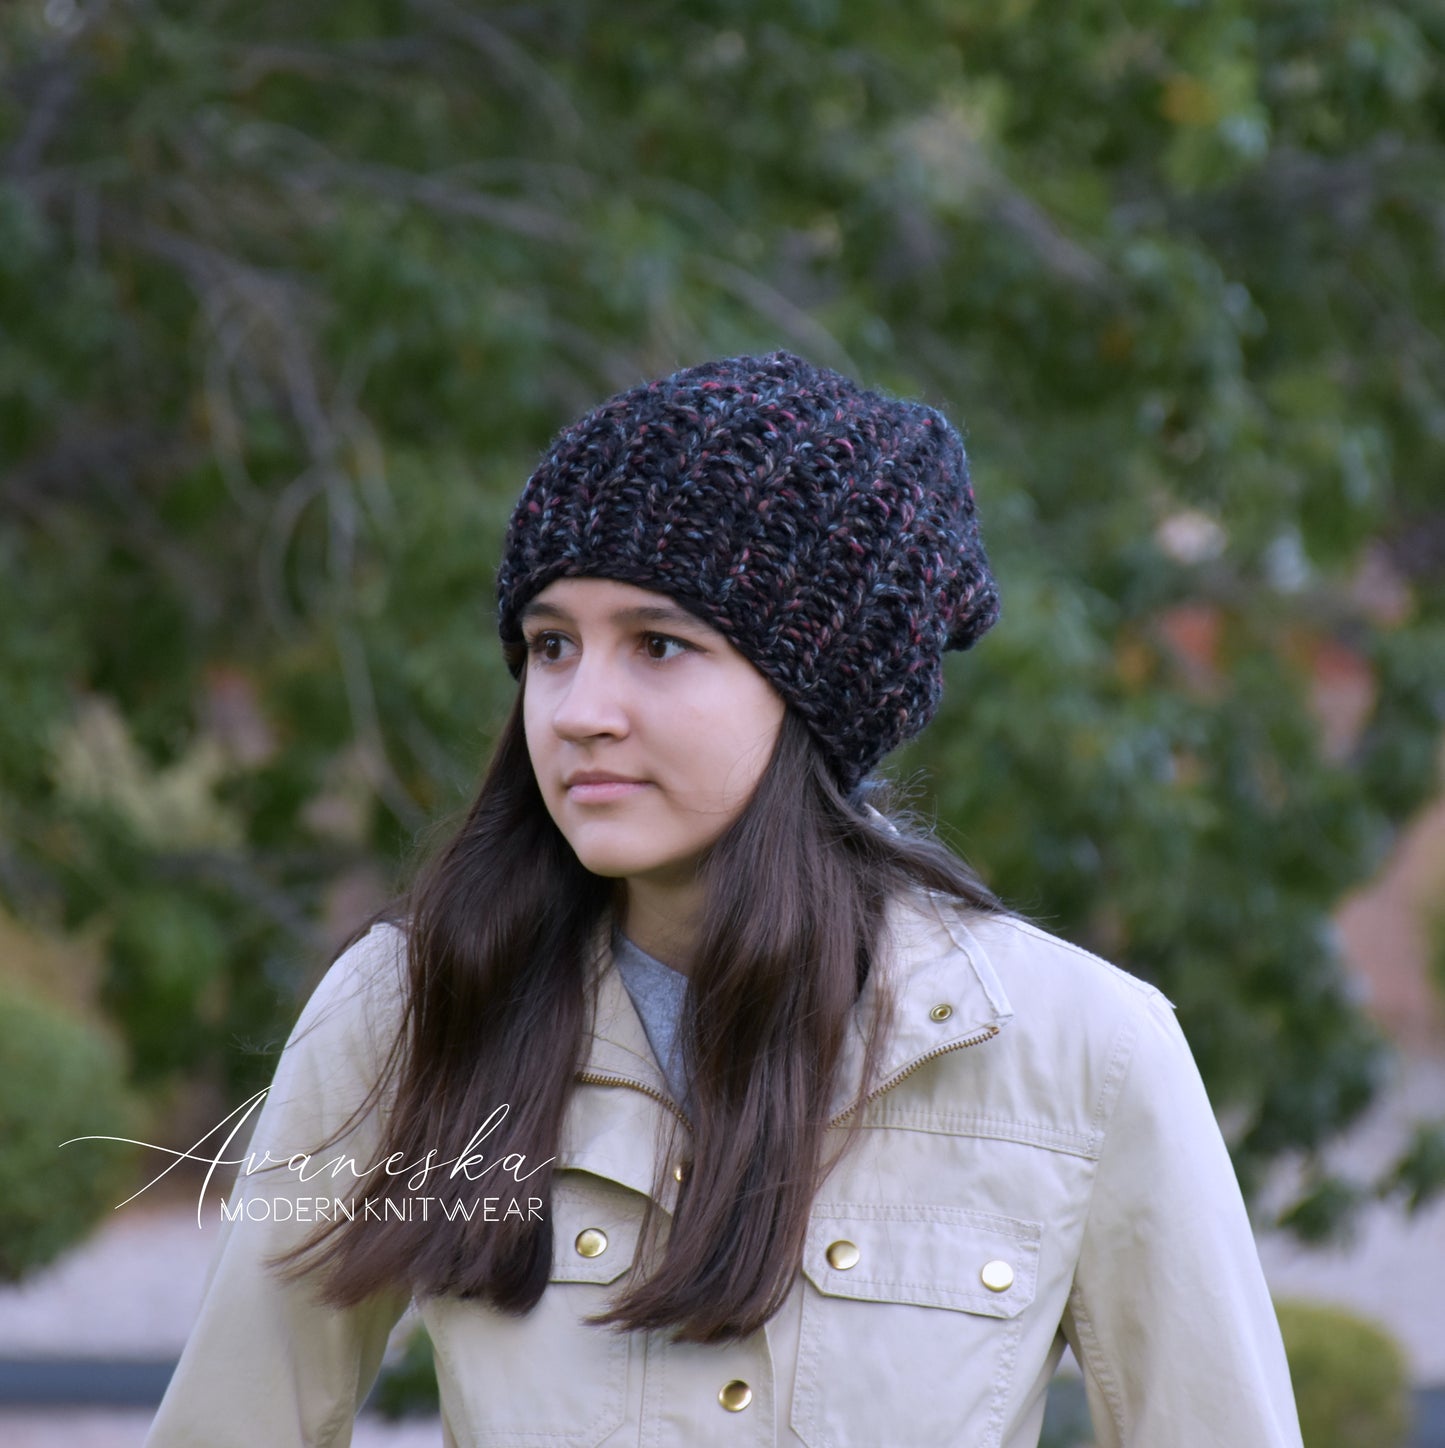 Woman's Knit Wool Winter Chunky Slouchy Hat